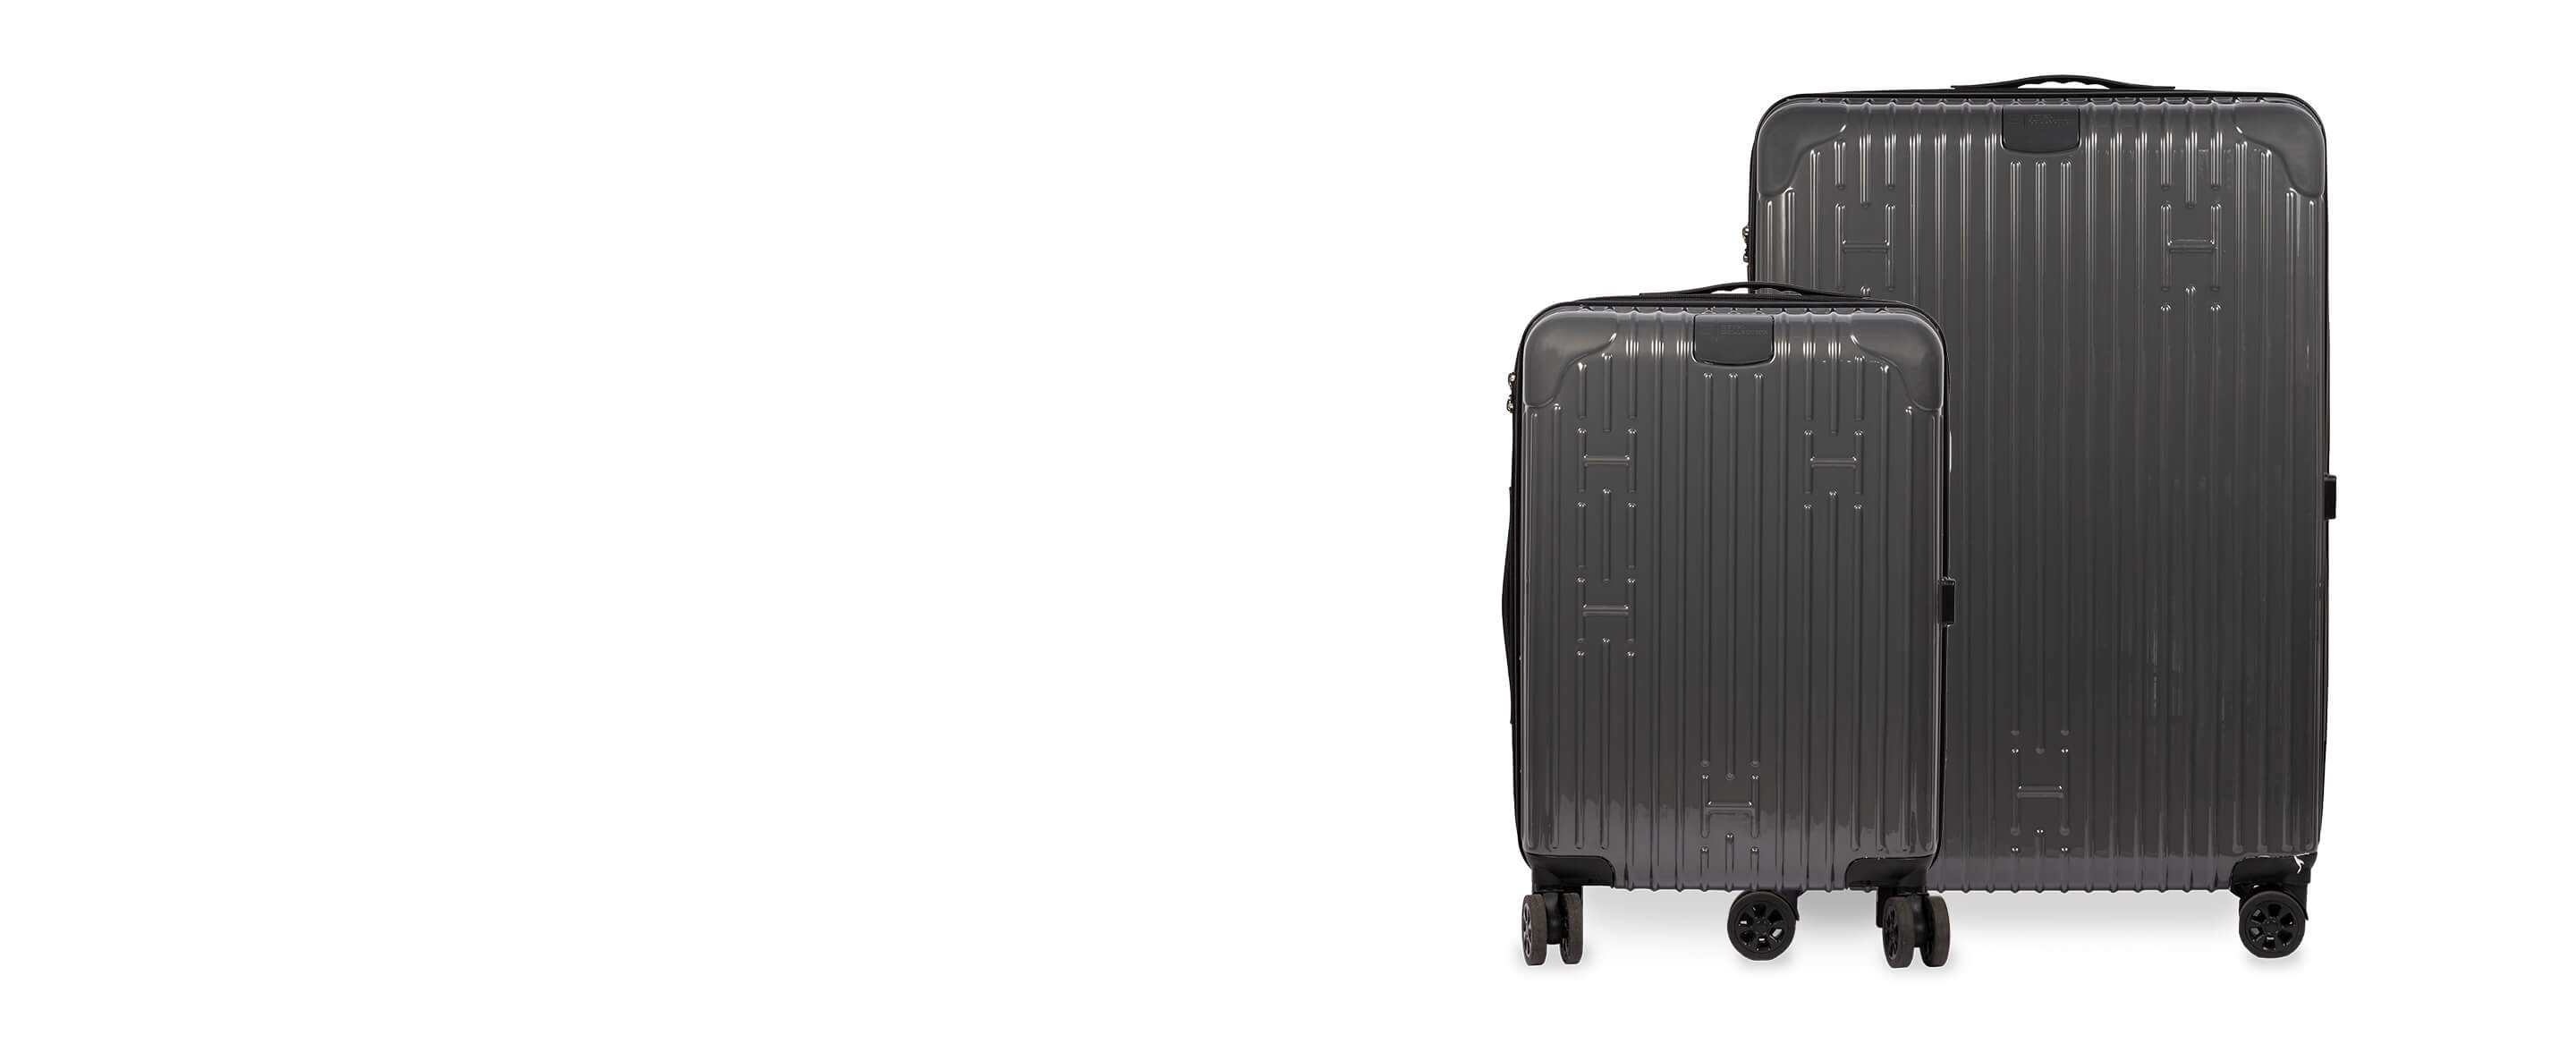 voyage collection luggage